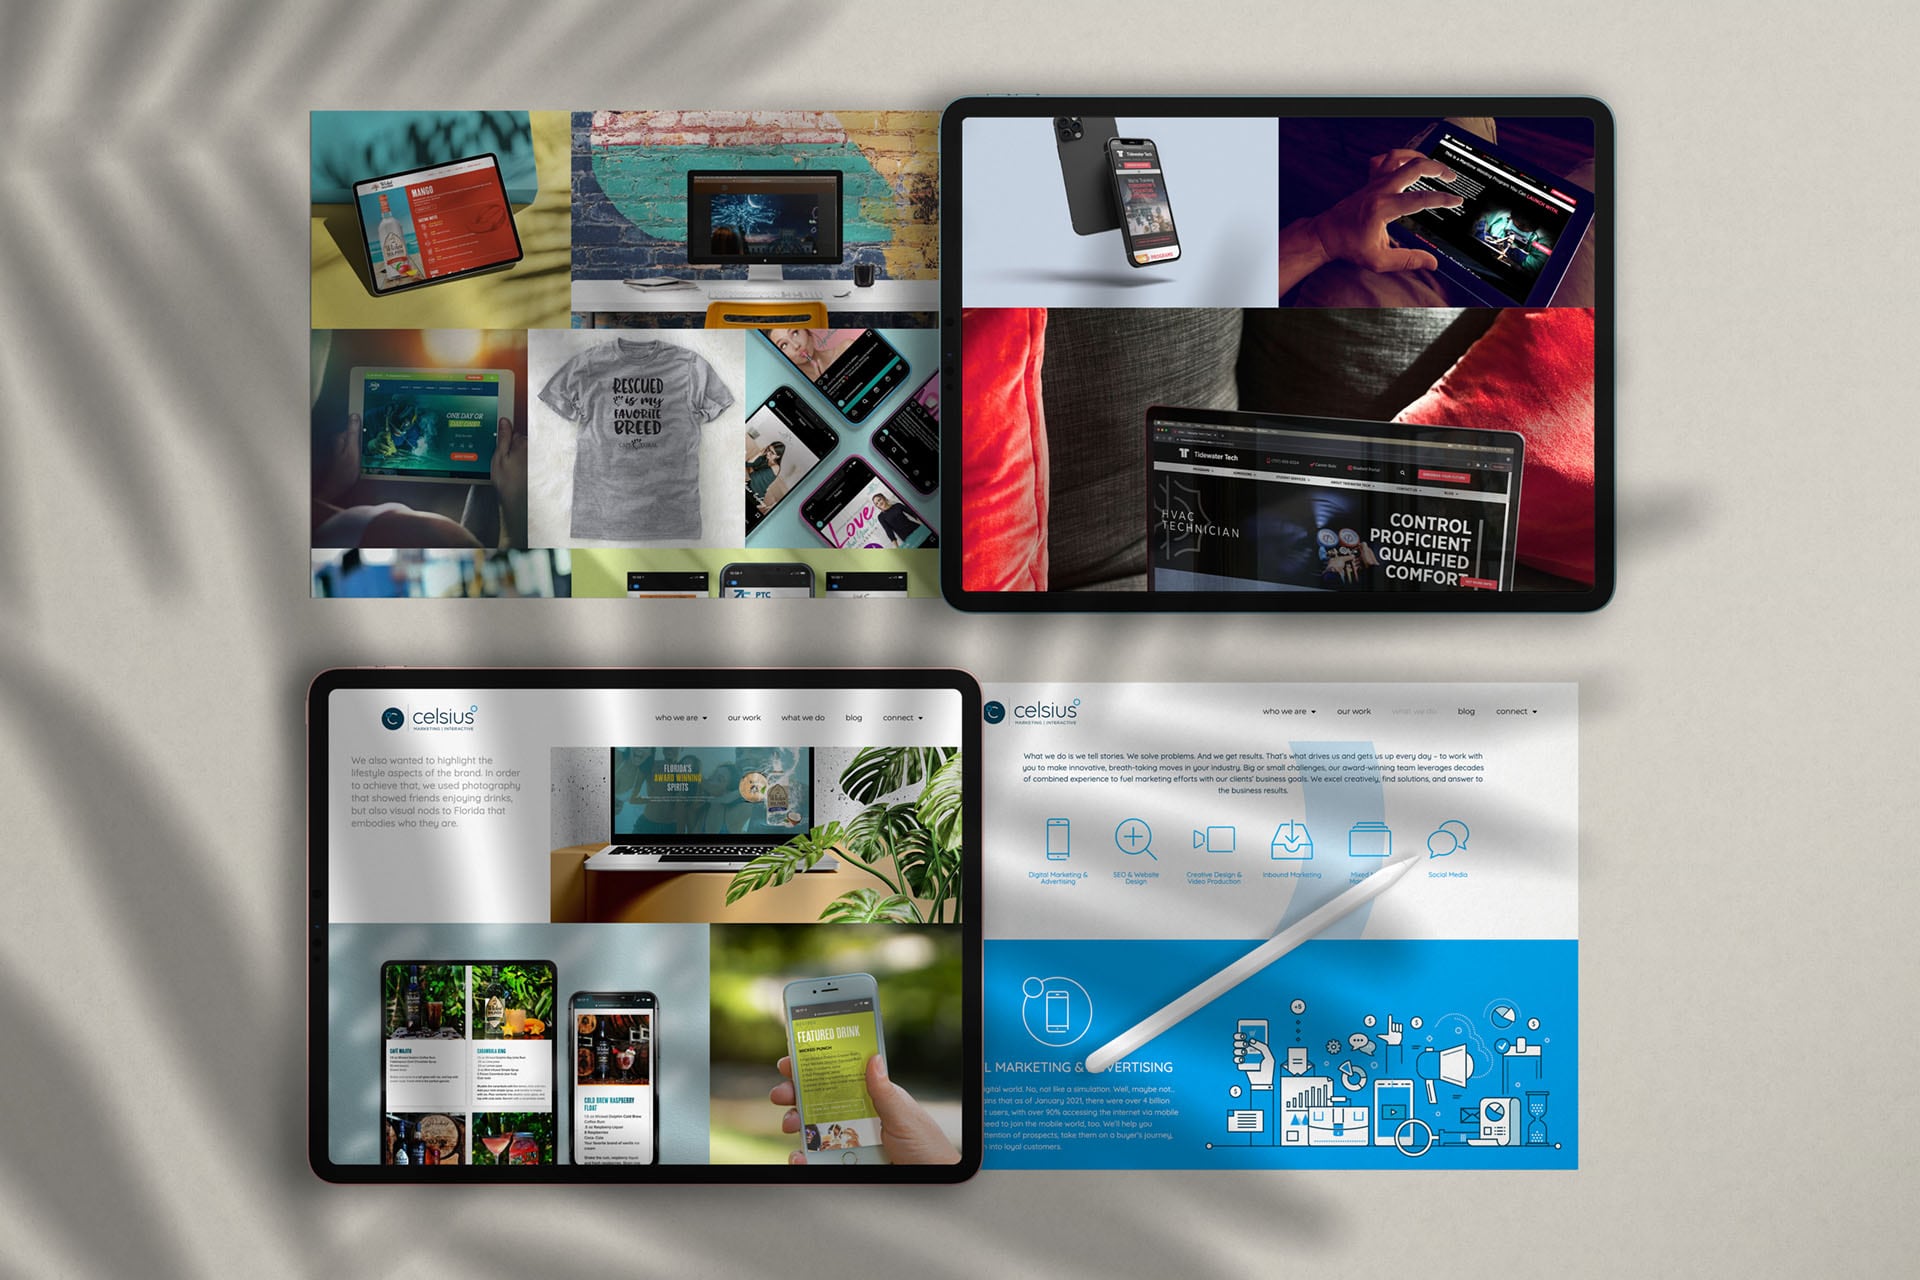 Various portfolio and service page sections of the Celsius Marketing | Interactive website featured on device screens.